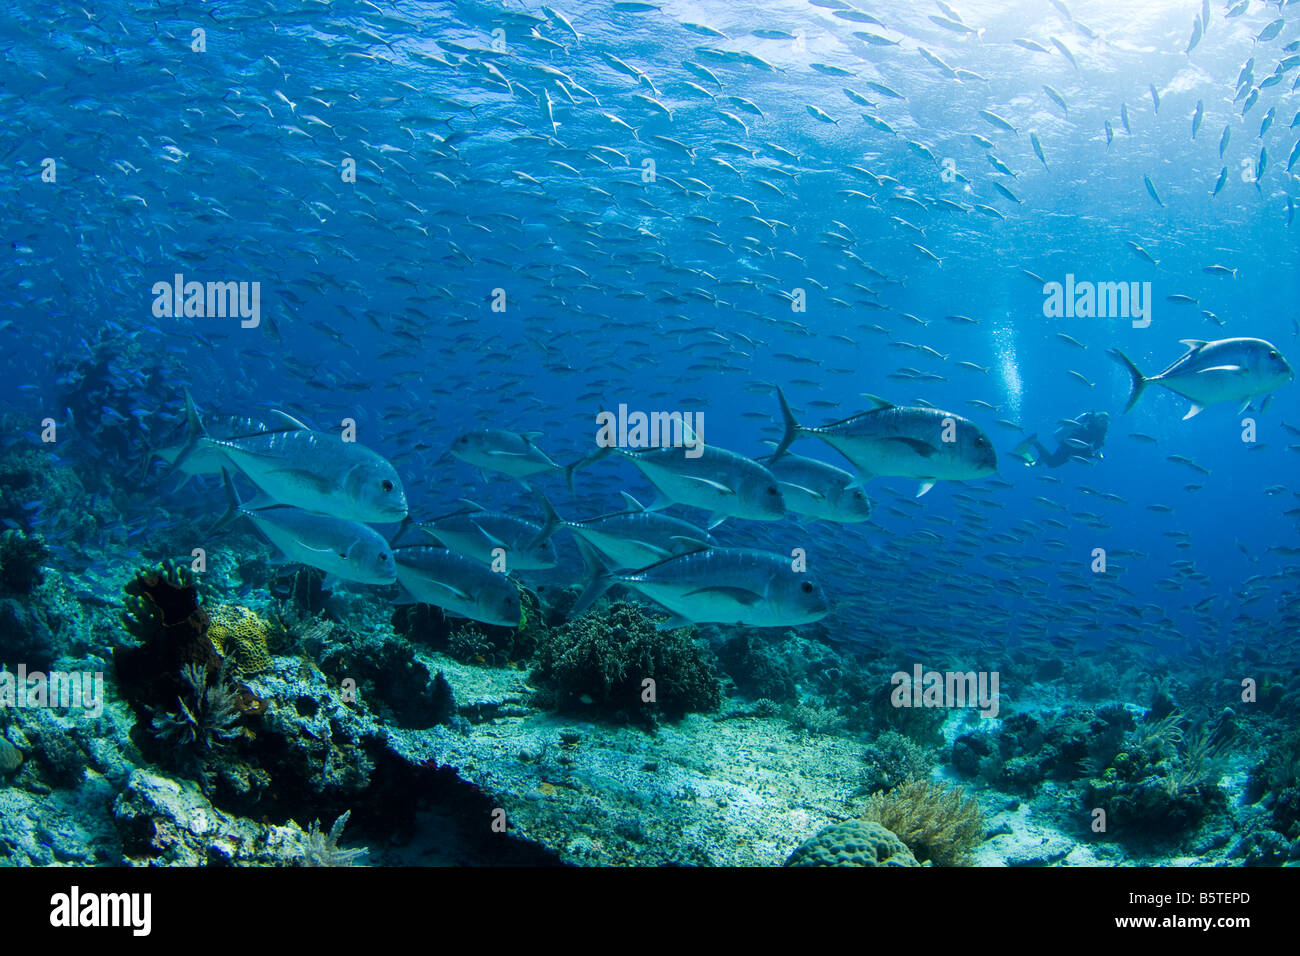 Diver and a school of giant trevally, Caranx ignobilis, hunting fusiliers over the reef in Komodo National Park, Indonesia. Stock Photo